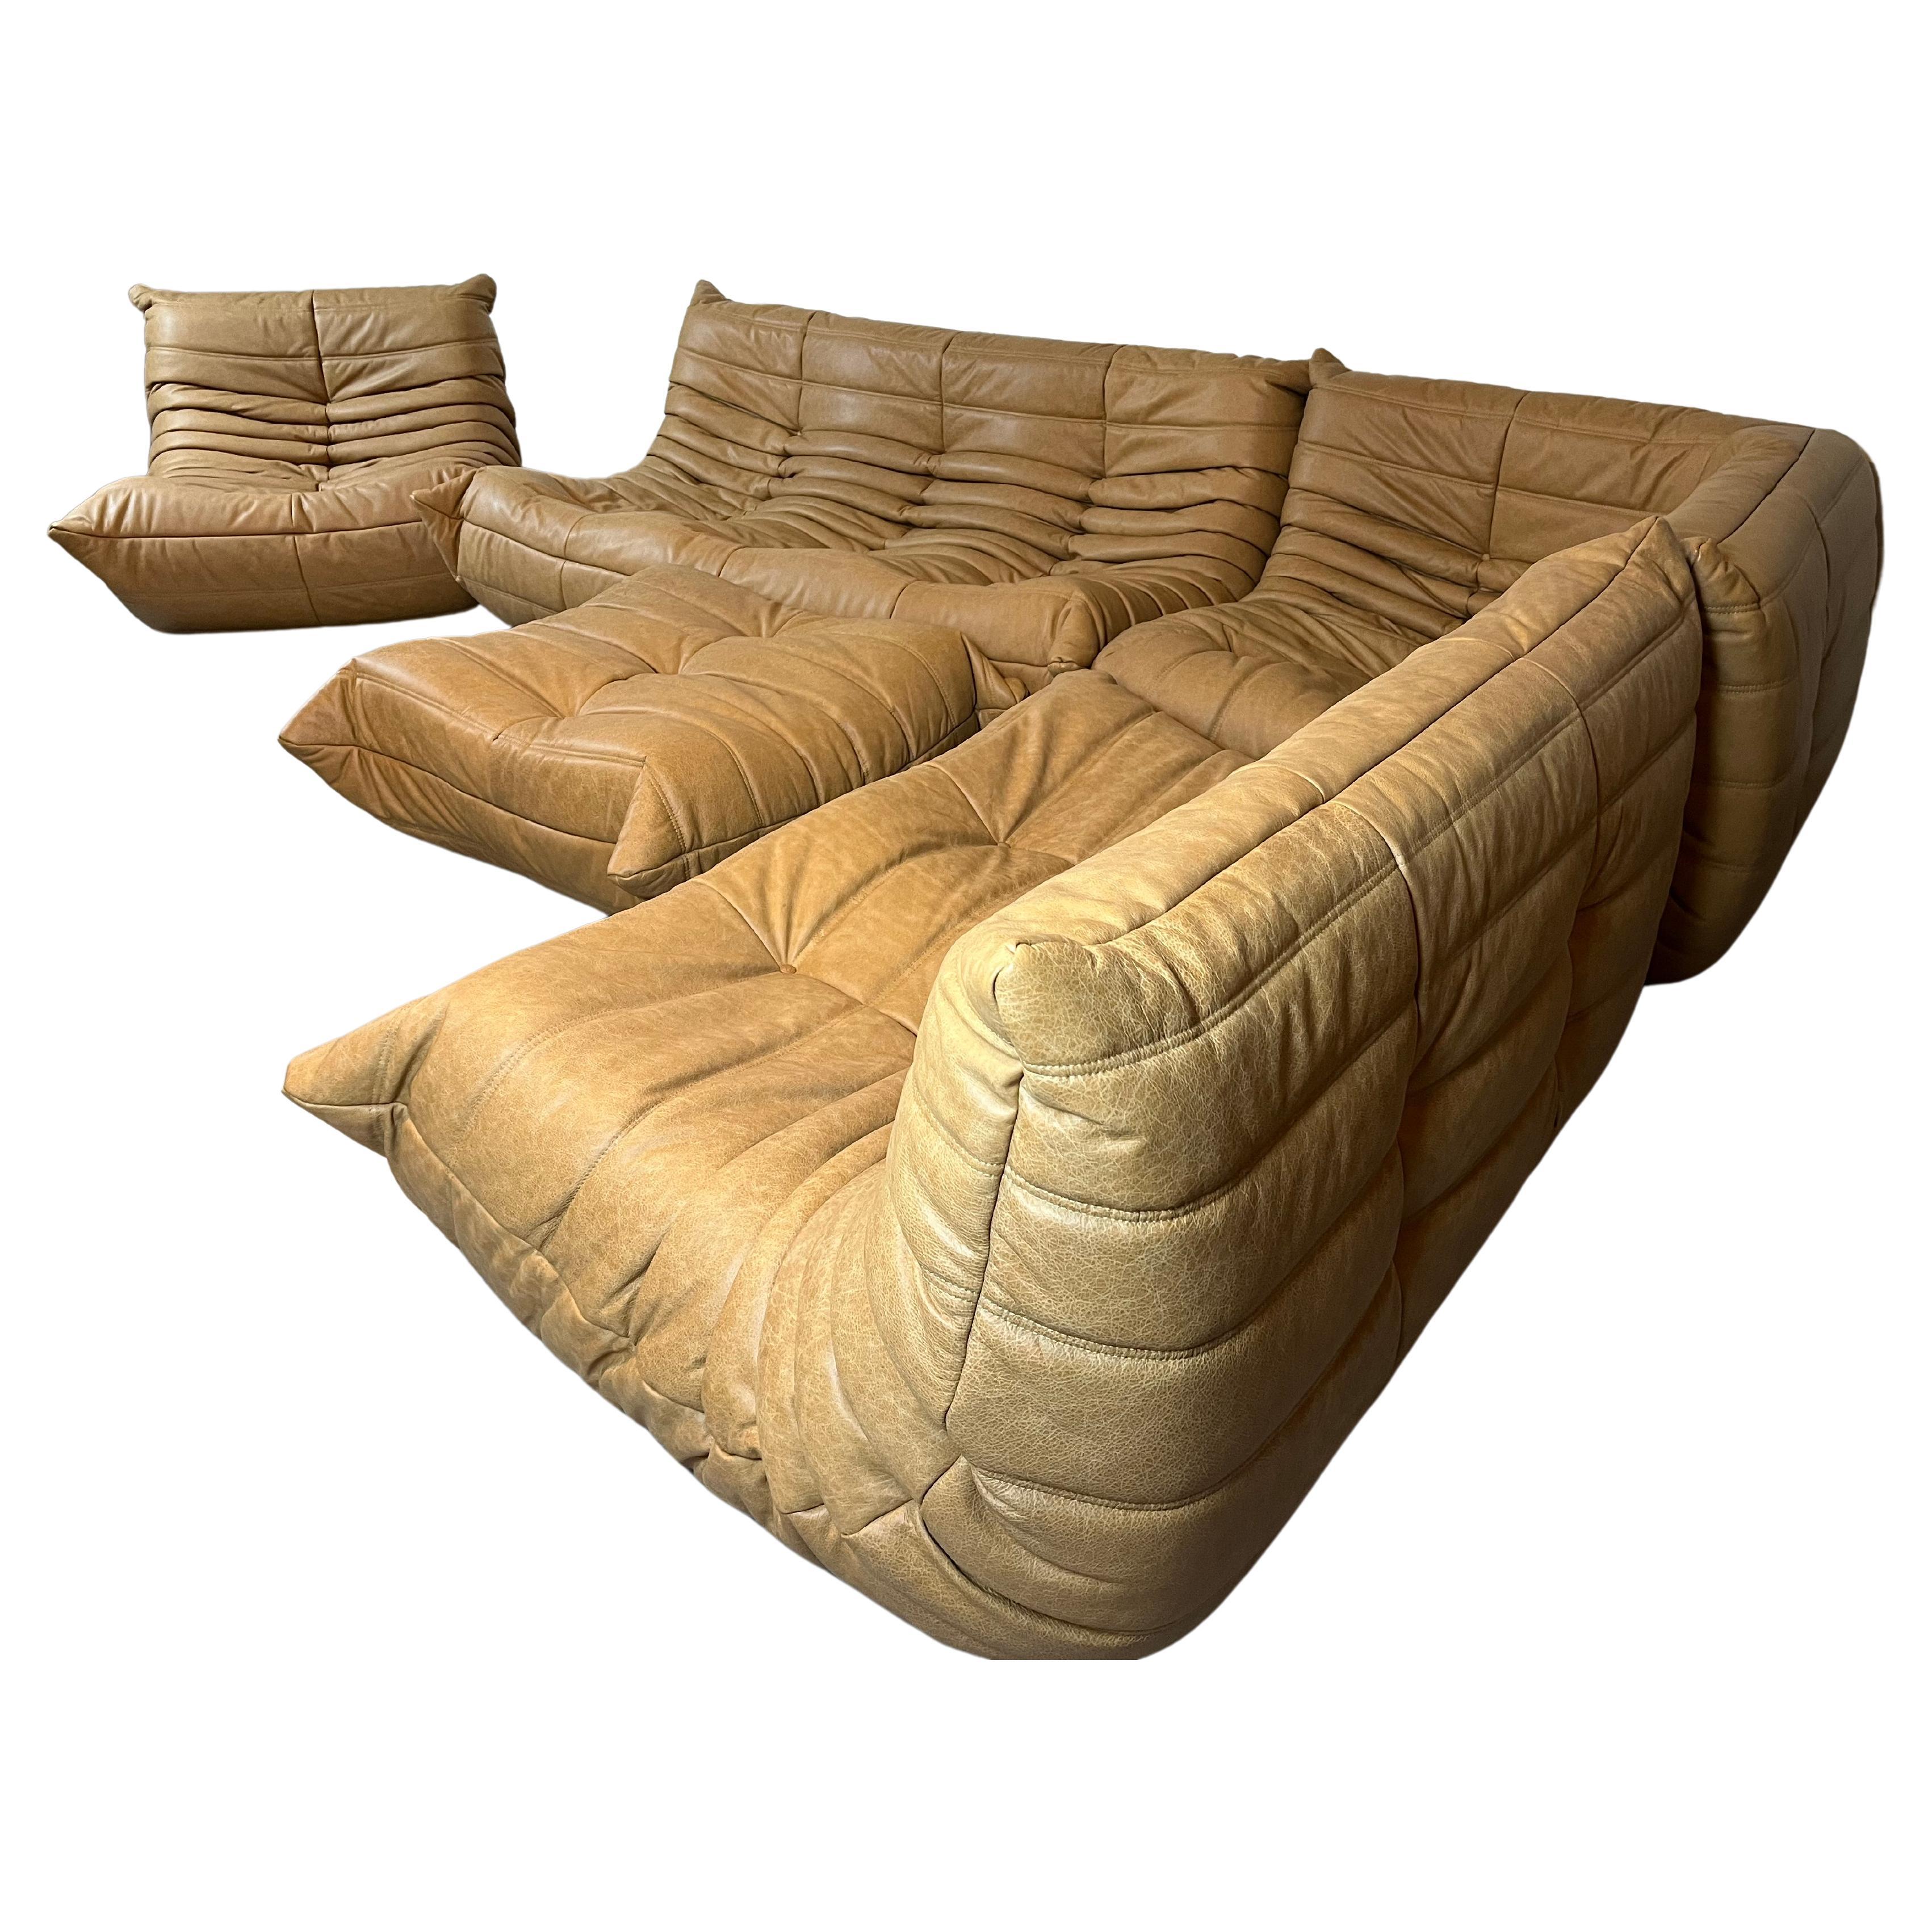 Camel leather Togo Sofa by Michel Ducaroy for Ligne Roset, Set of 5 pieces